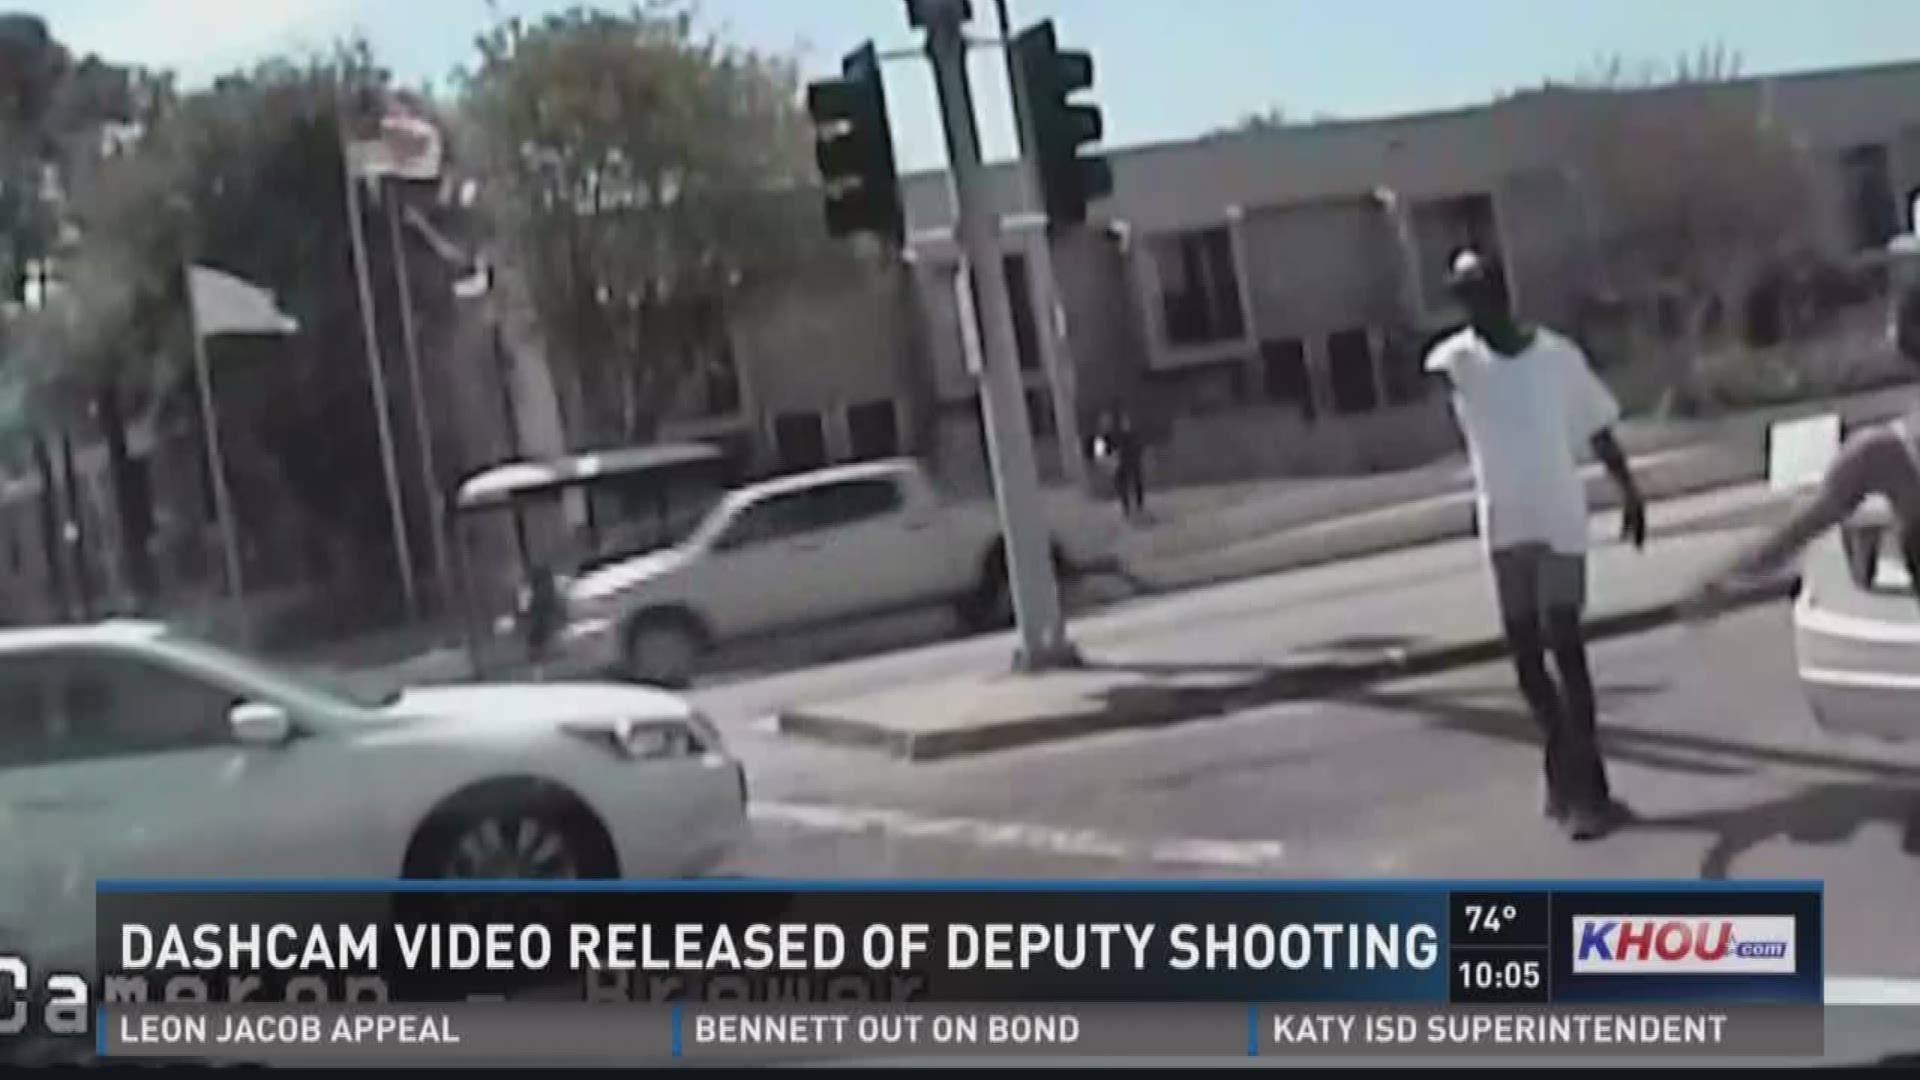 New dash cam video showed what led to the shooting of an unarmed man by a Harris County Sheriff's deputy in the Greenspoint area last week.